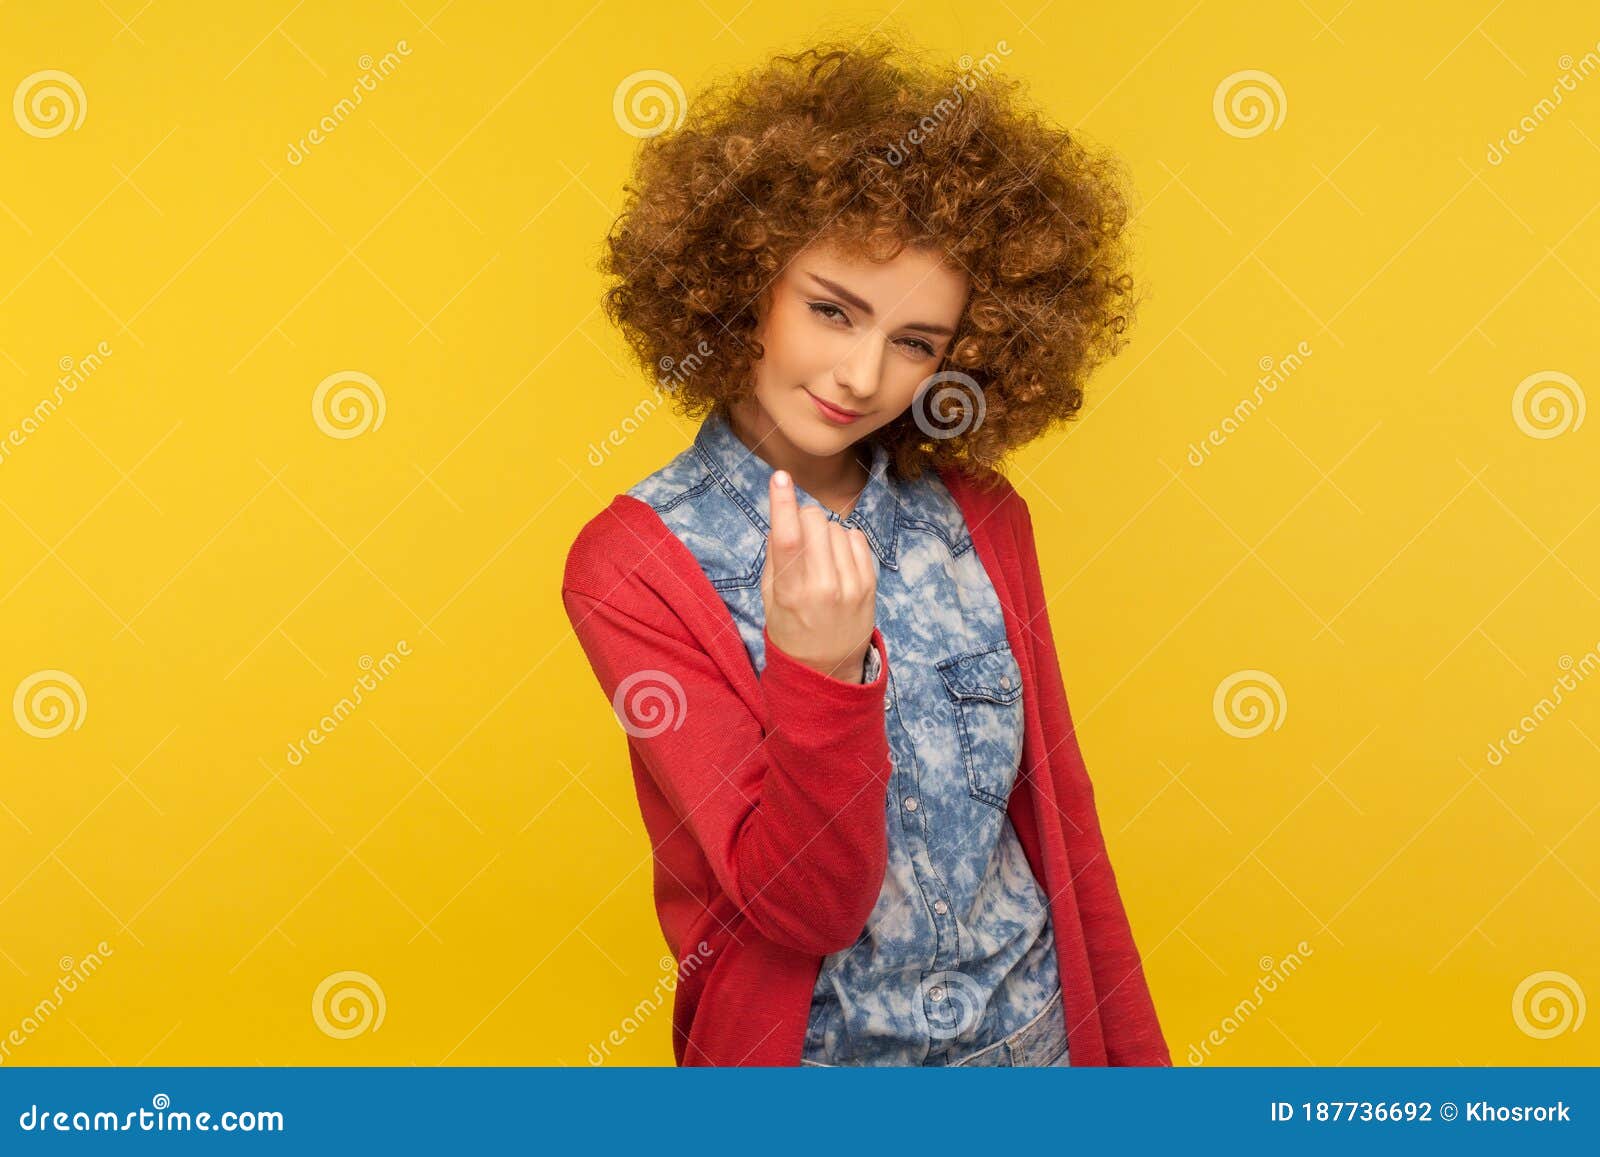 Come Here, Follow Me! Portrait of Pretty Curly-haired Woman Looking ...